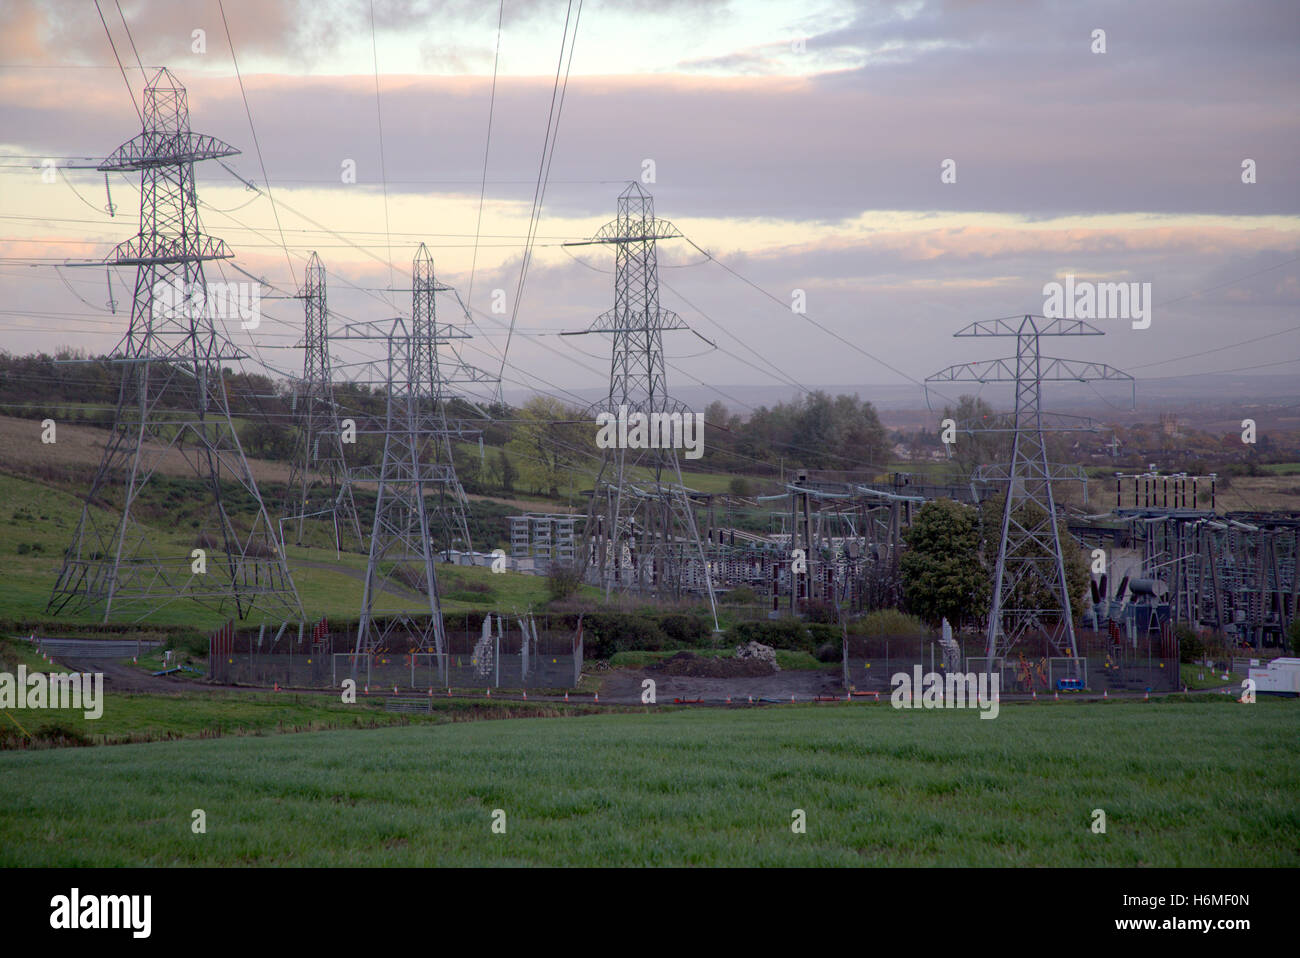 Electrical substation by A810 roundabout Duntocher Glasgow road near faifley Stock Photo